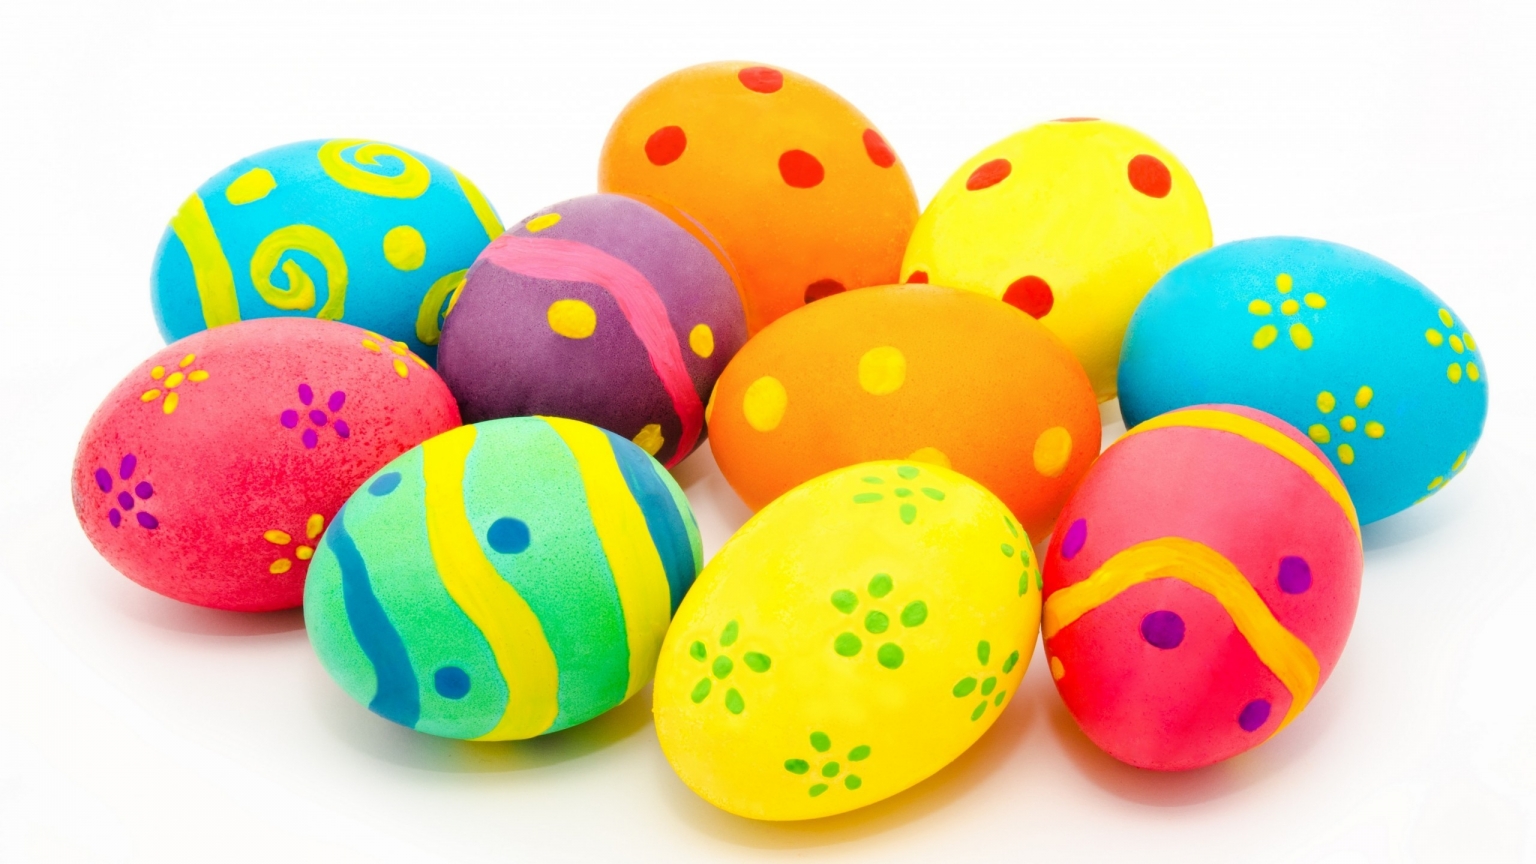 Many Colorful Easter Eggs for 1536 x 864 HDTV resolution